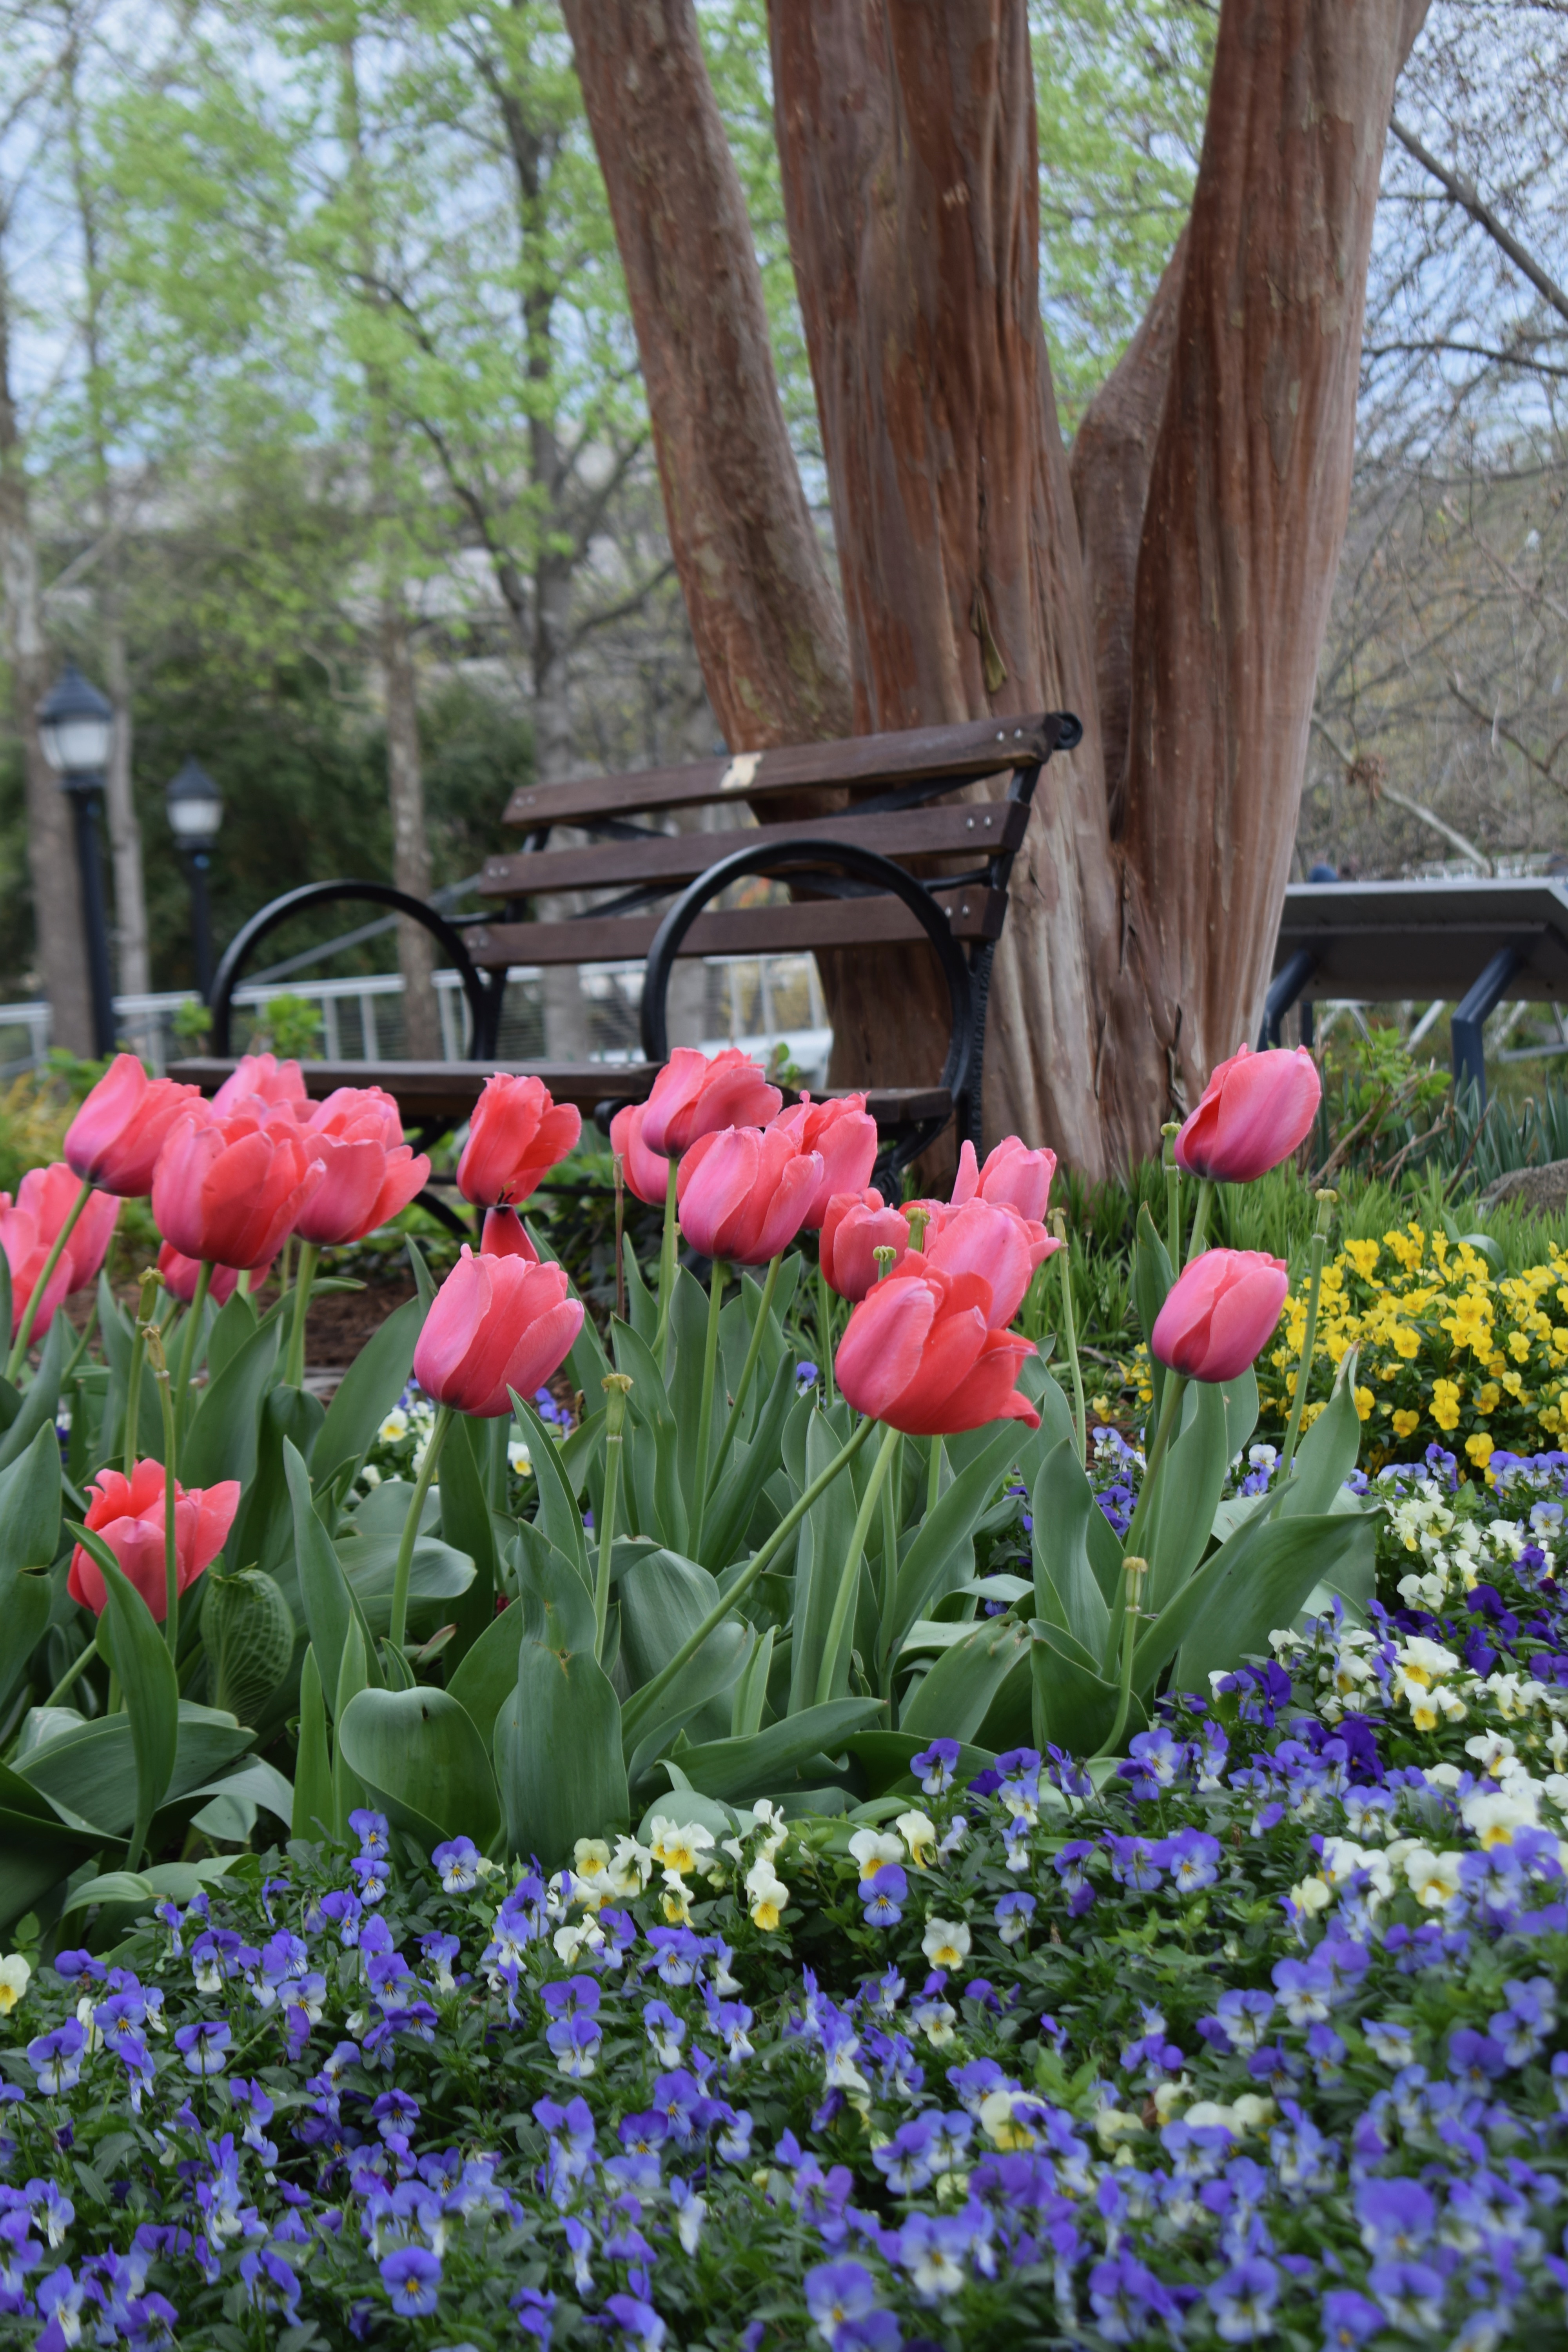 Park Bench and Spring Flowers in Greenville, S.C., It's the weekend! Number 45